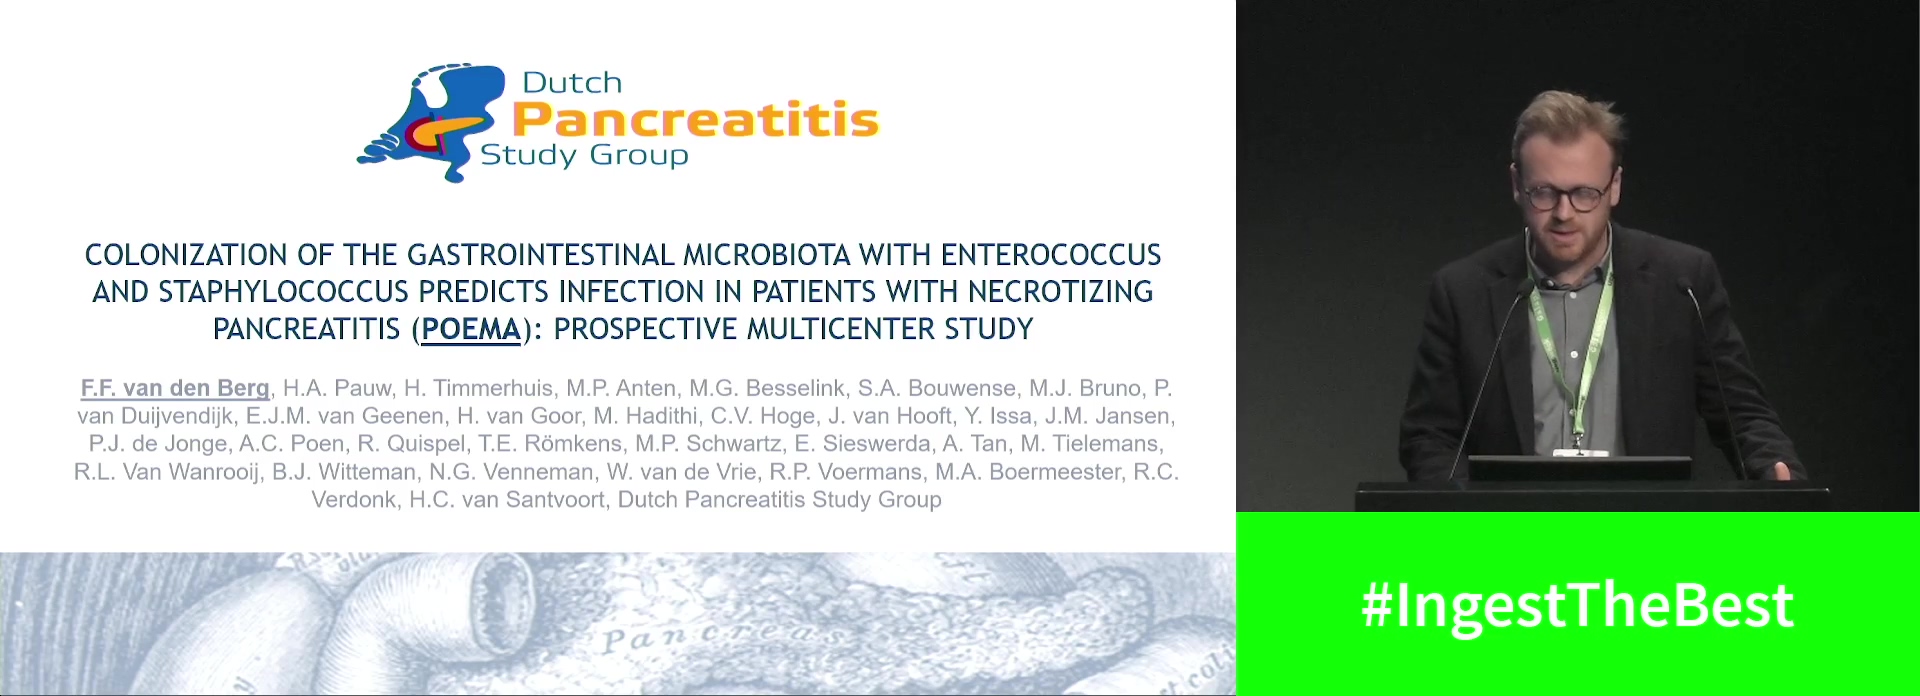 COLONIZATION OF THE GASTROINTESTINAL MICROBIOTA WITH ENTEROCOCCUS AND STAPHYLOCOCCUS PREDICTS INFECTION IN PATIENTS WITH NECROTIZING PANCREATITIS (POEMA): PROSPECTIVE MULTICENTER STUDY